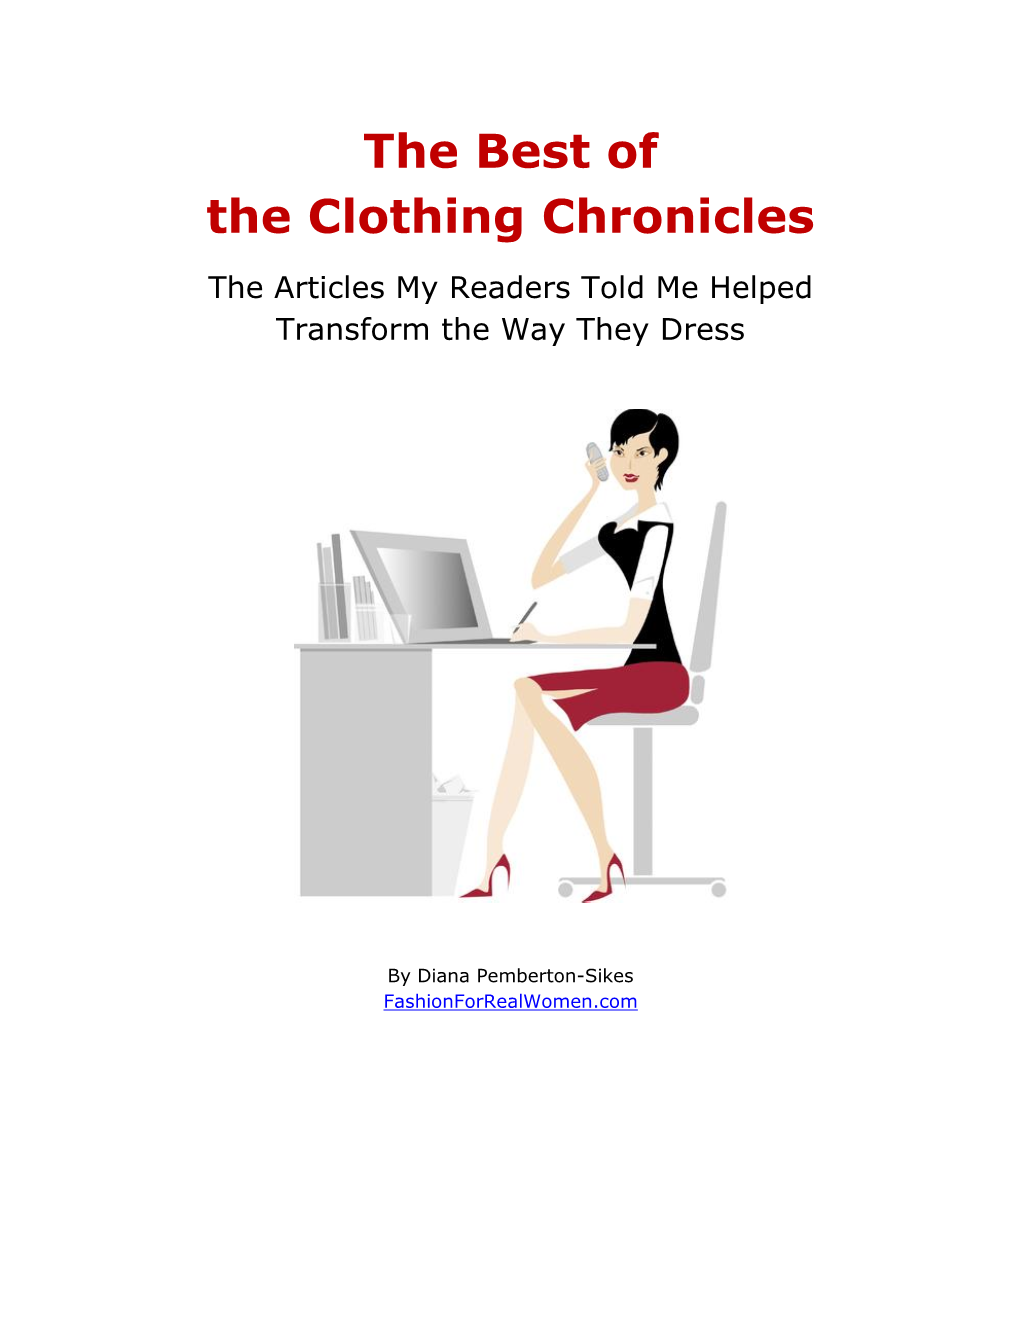 The Best of the Clothing Chronicles